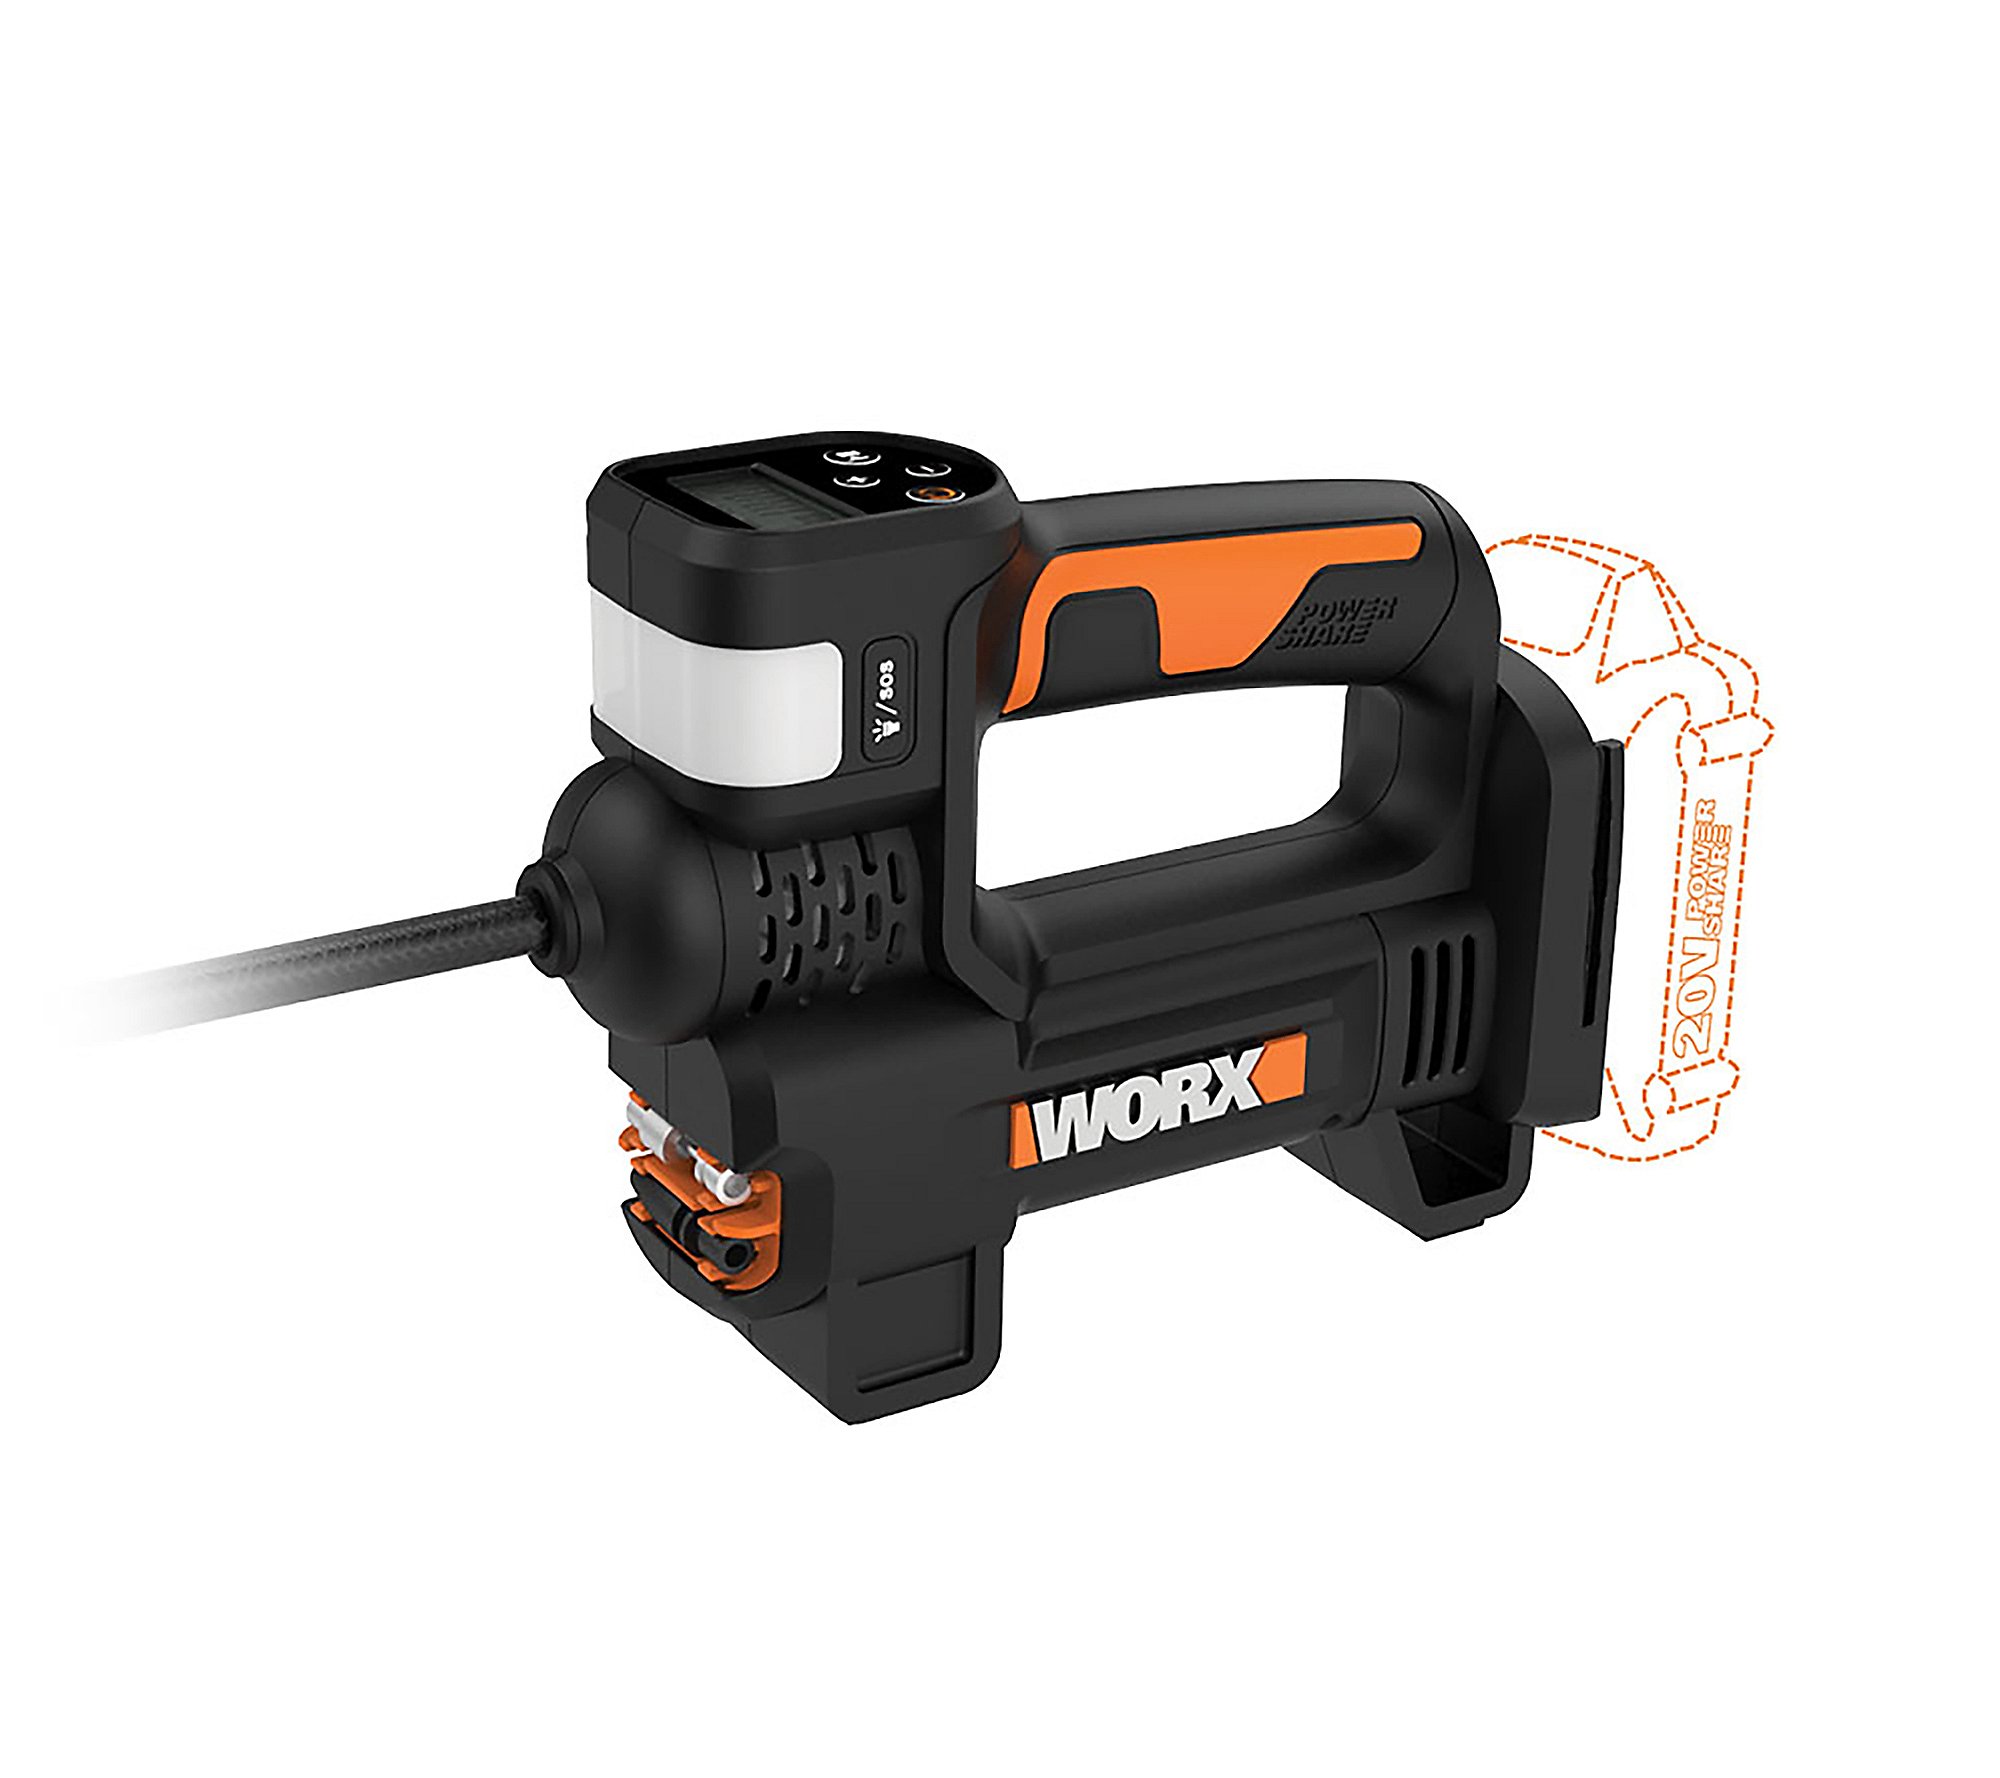 WORX WX092L.9 20V Portable Air Pump Inflator (T ool Only)